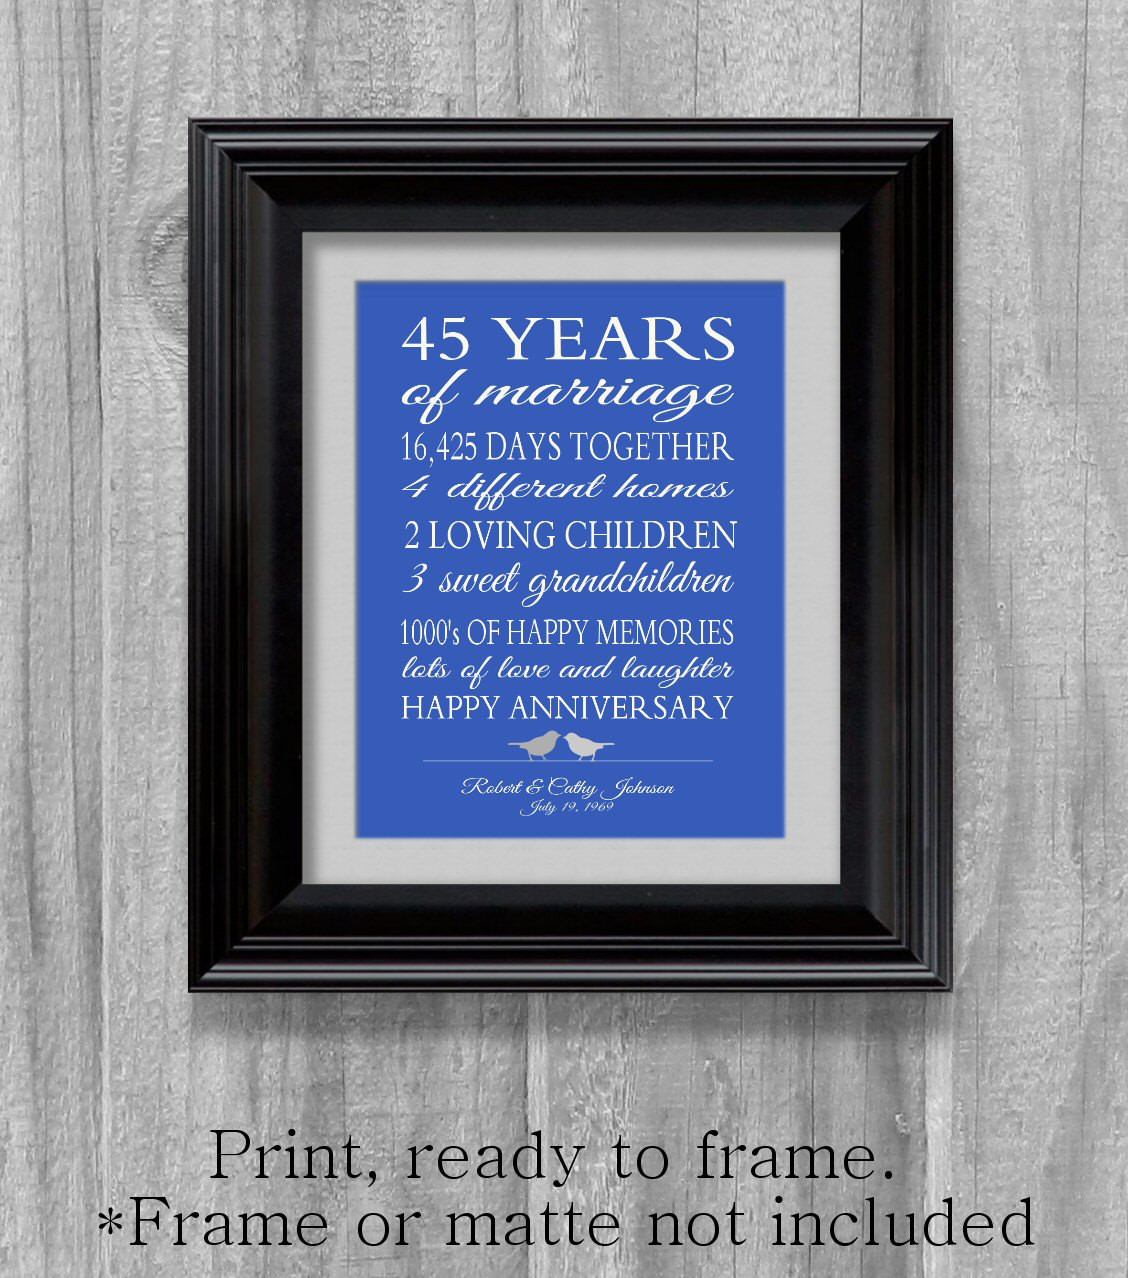 45 Year Anniversary Gift Ideas
 45th Anniversary Gift Parents Sapphire Blue Personalized Love